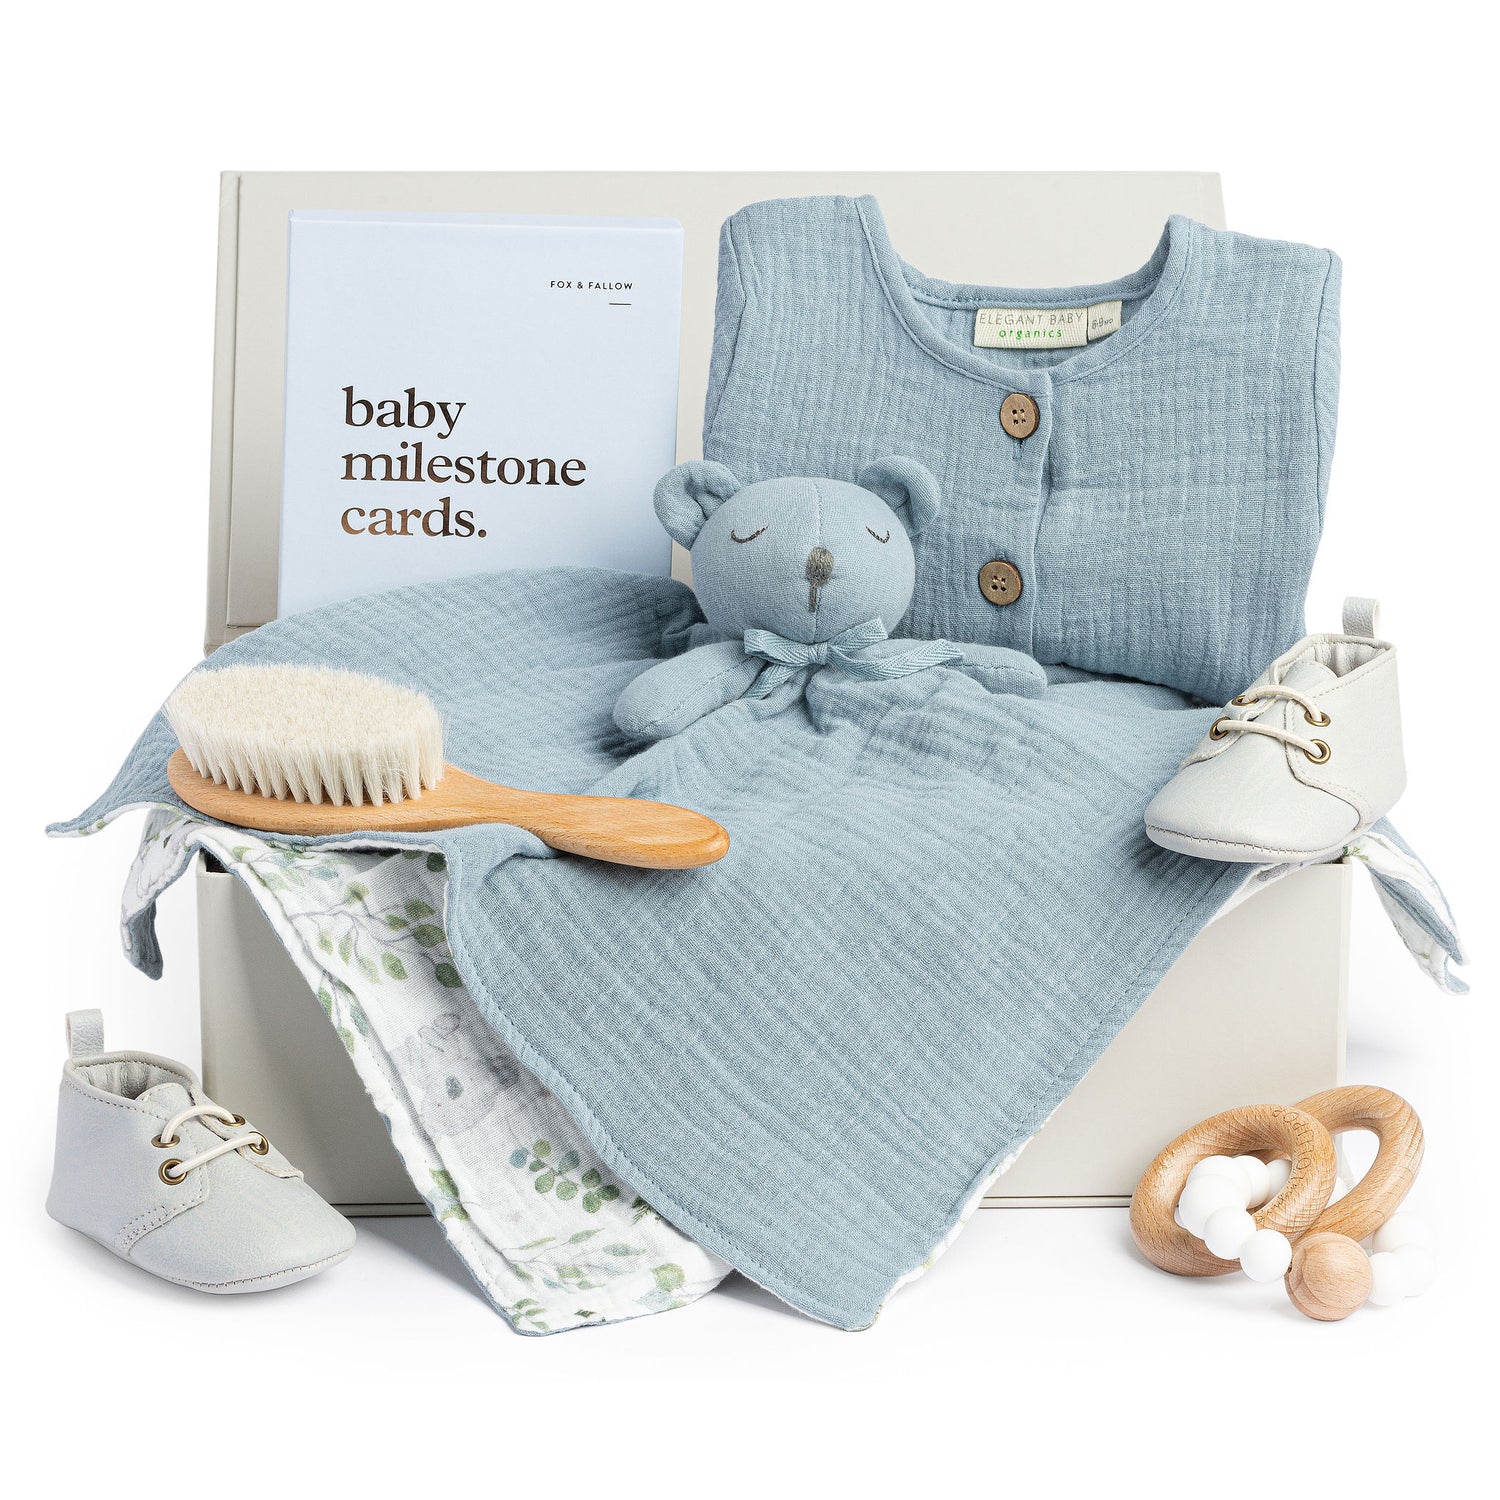 Baby boy gift box with blue romper, blue security blanket, white baby moccasins and blue milestone cards.